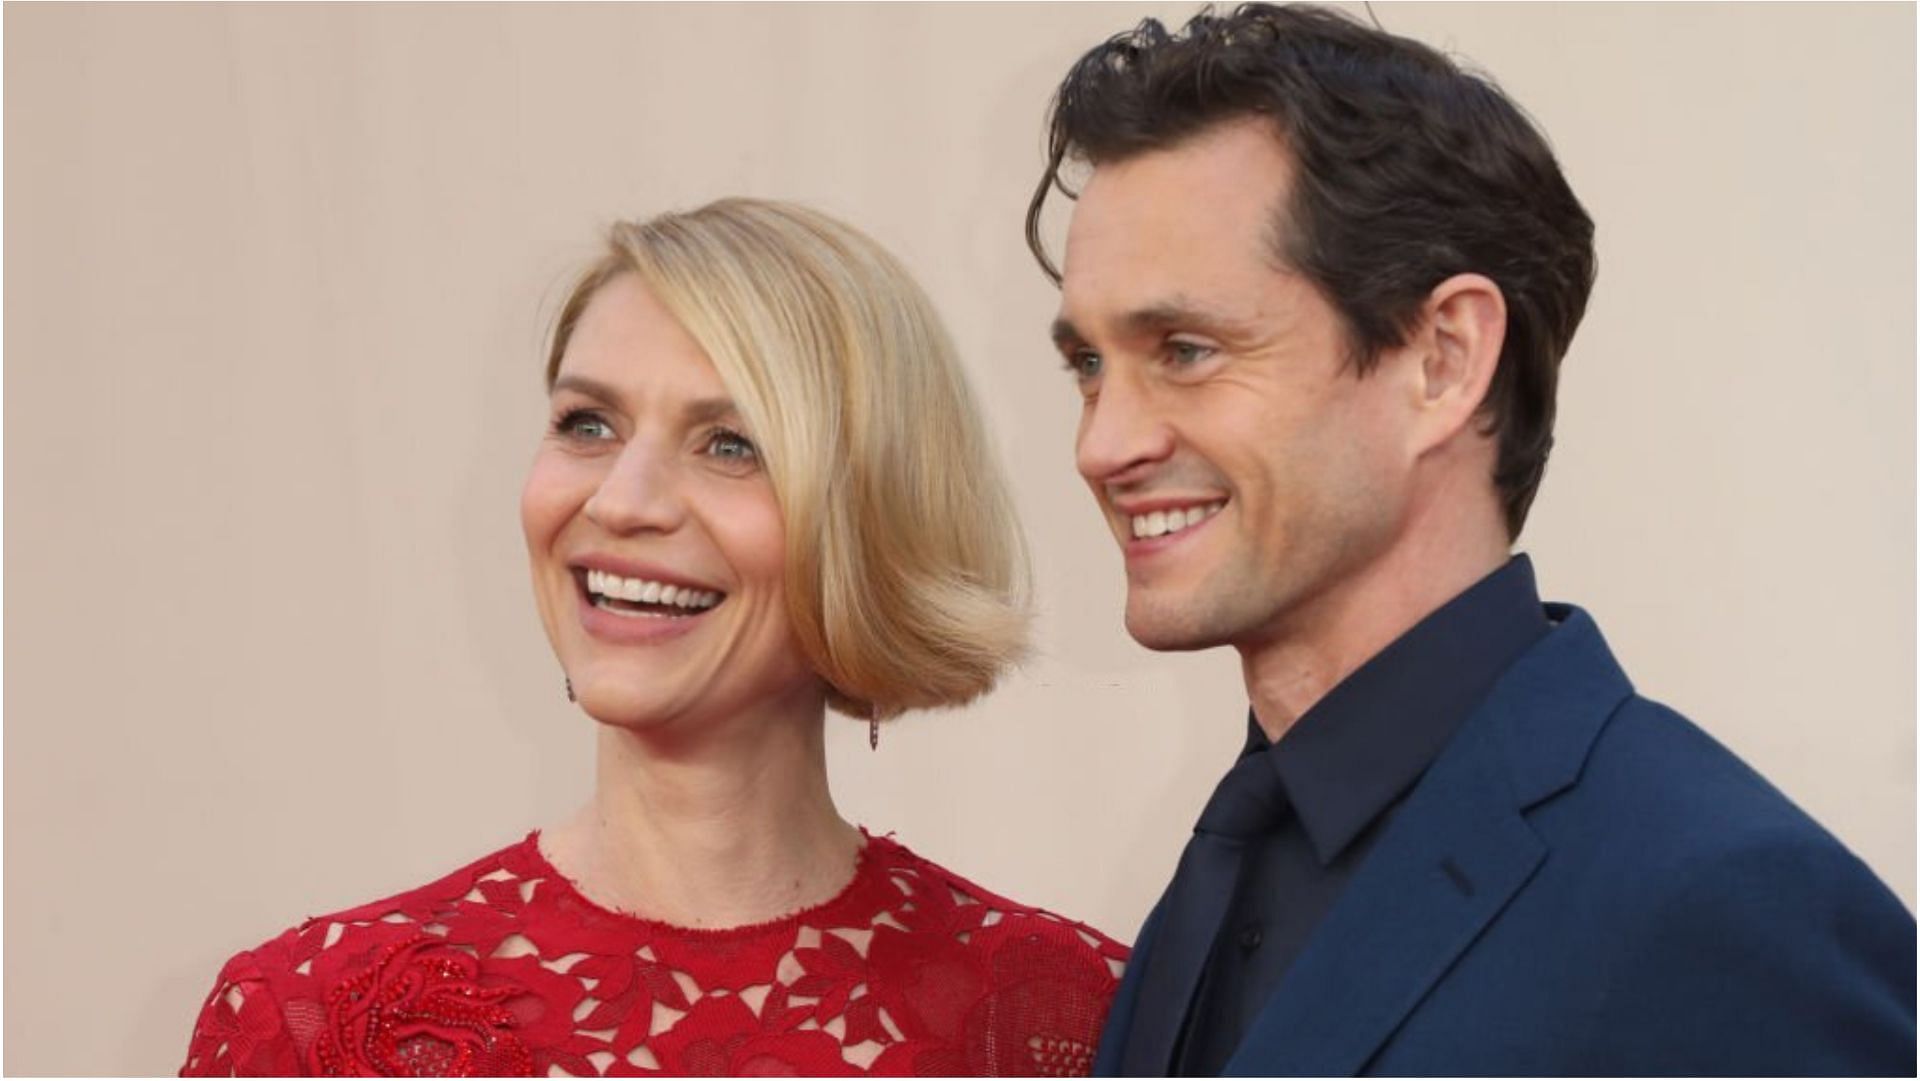 Claire Danes and Hugh Dancy tied the knot in 2009 (Image via Lia Toby/Getty Images)